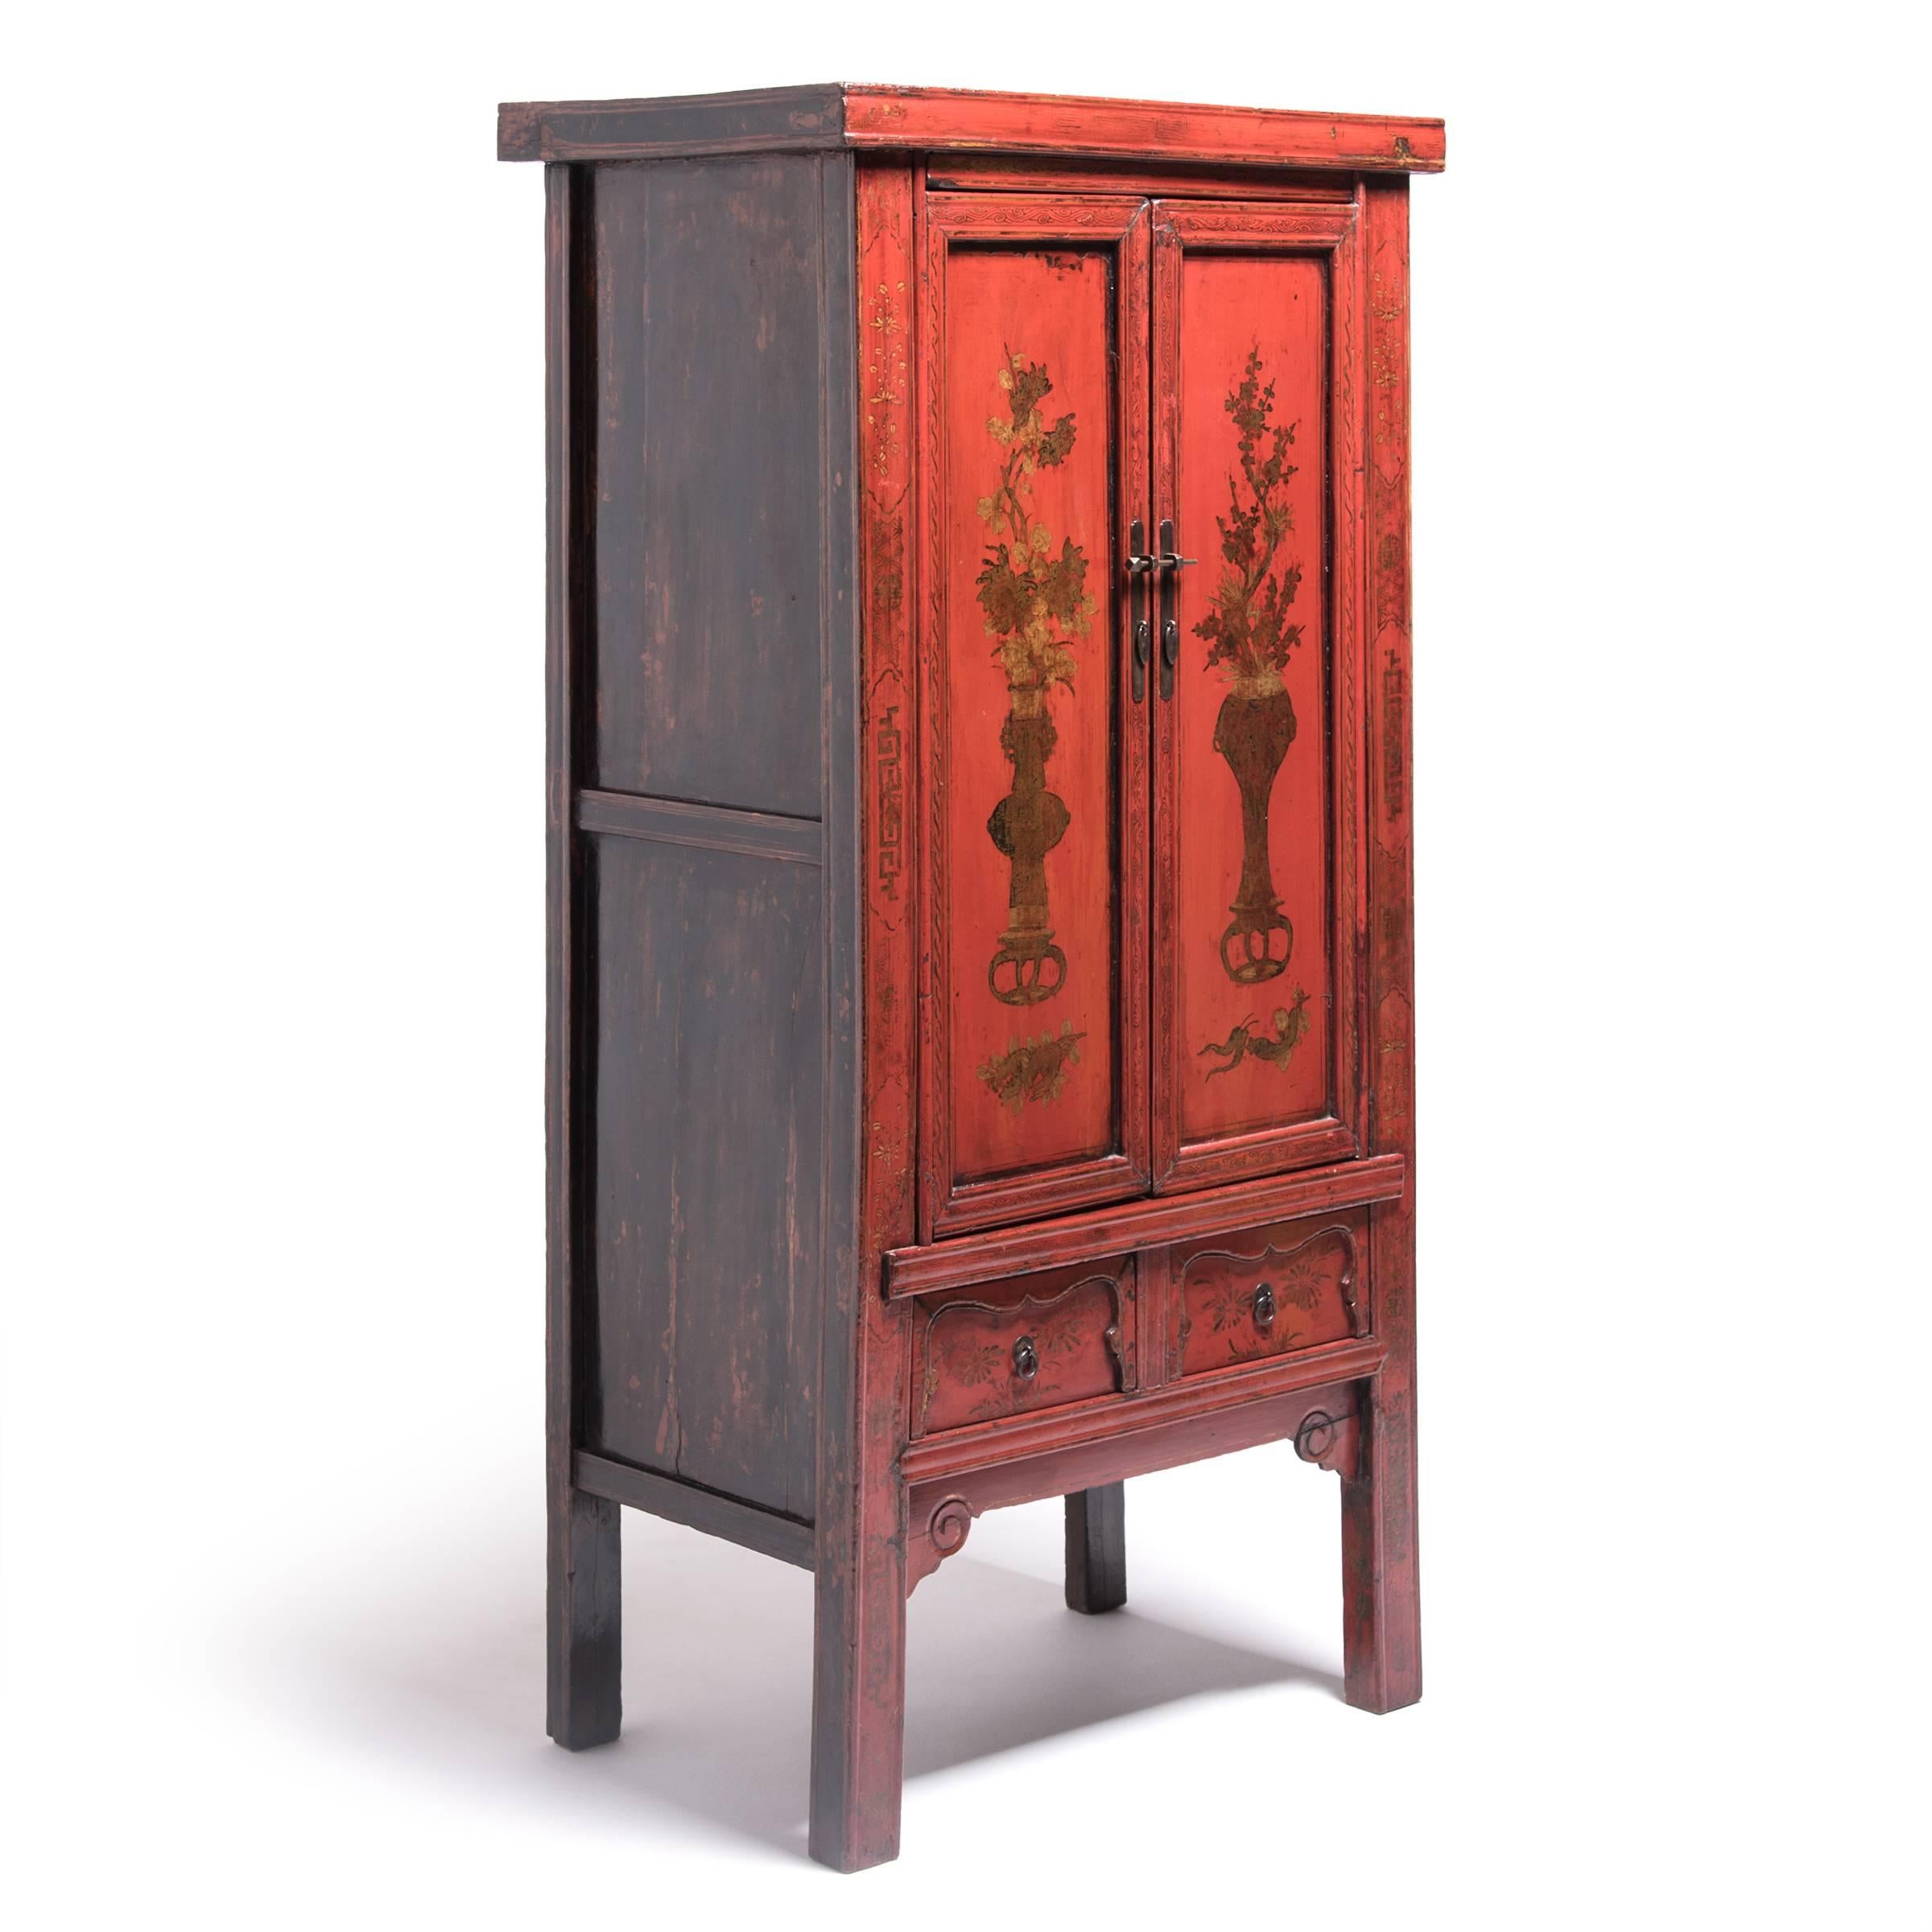 Qing Chinese Red Lacquer Painted Cabinet, c. 1850